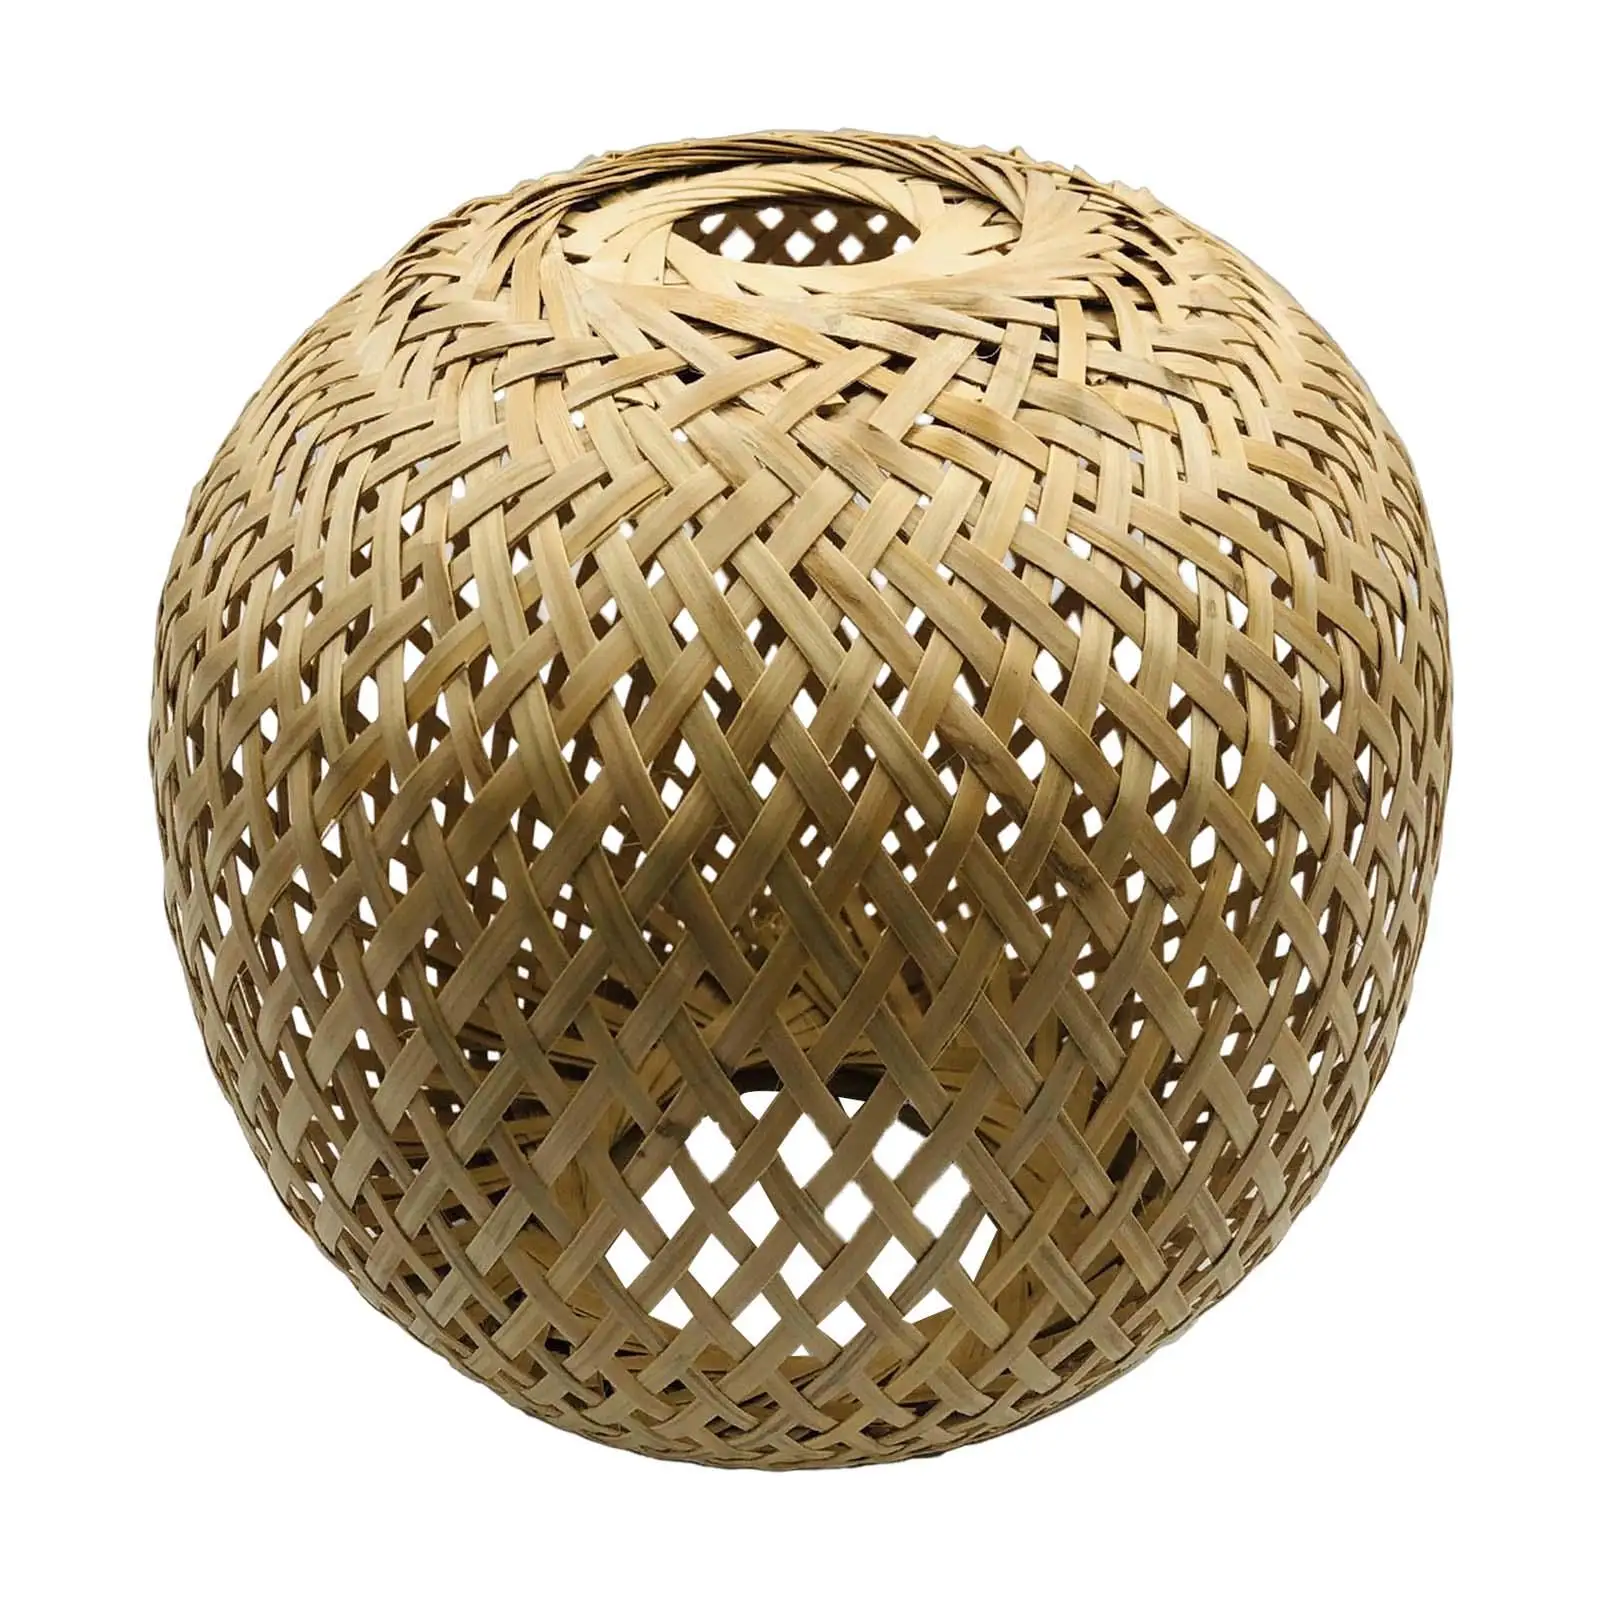 Rustic Pendant Light Cover Ceiling Light Fixture Ornament Minimalistic Woven Bamboo Lamp Shade for Nursery Living Room Bedroom